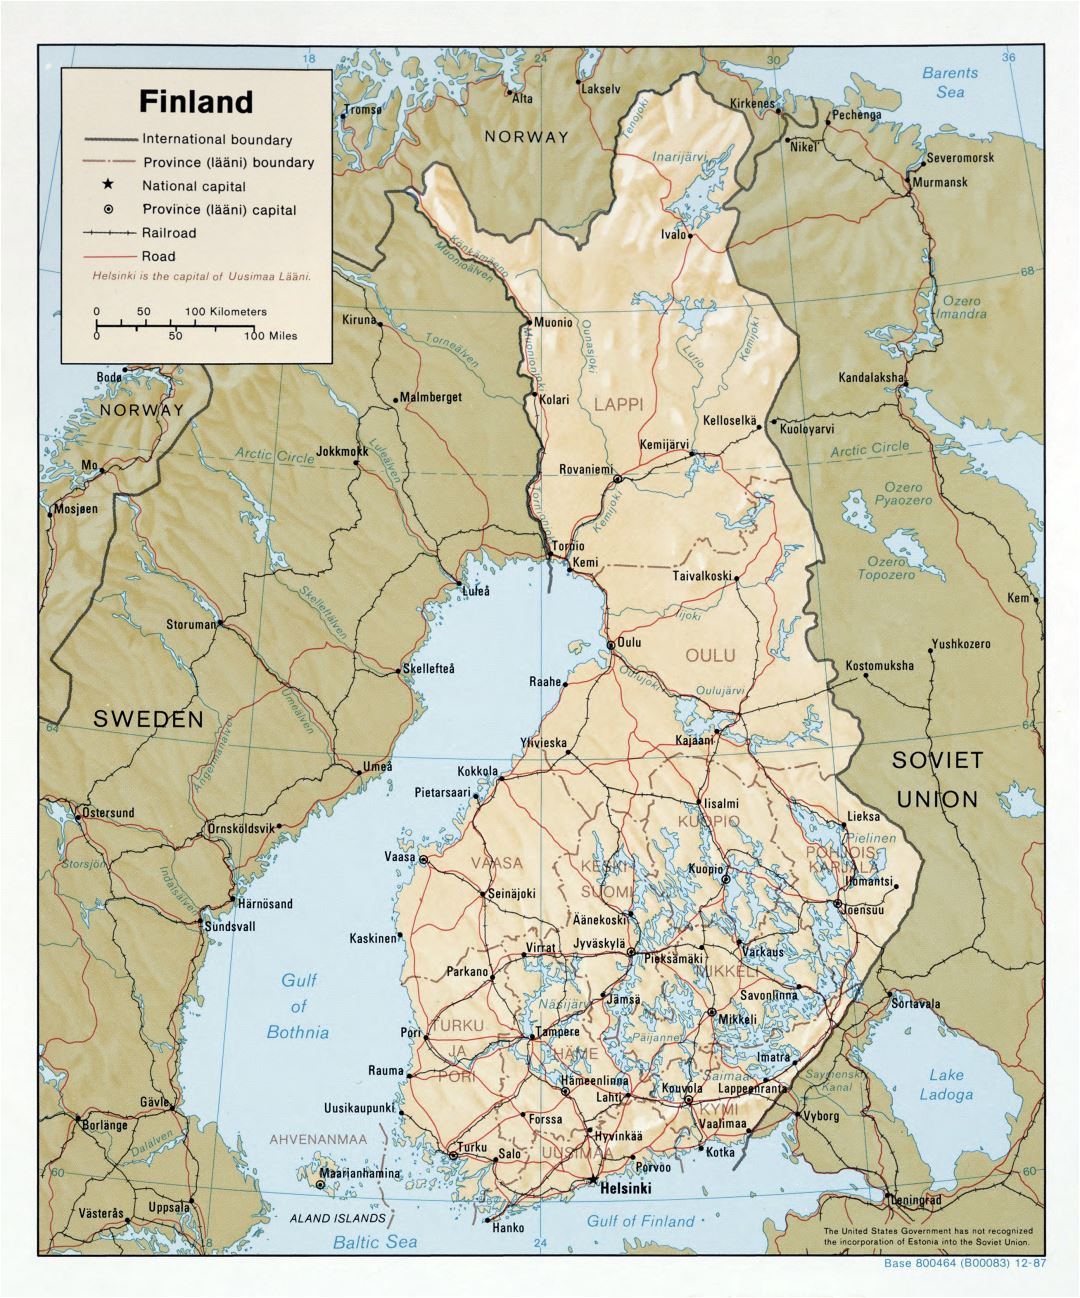 Large scale political and administrative map of Finland with relief, roads and major cities - 1987